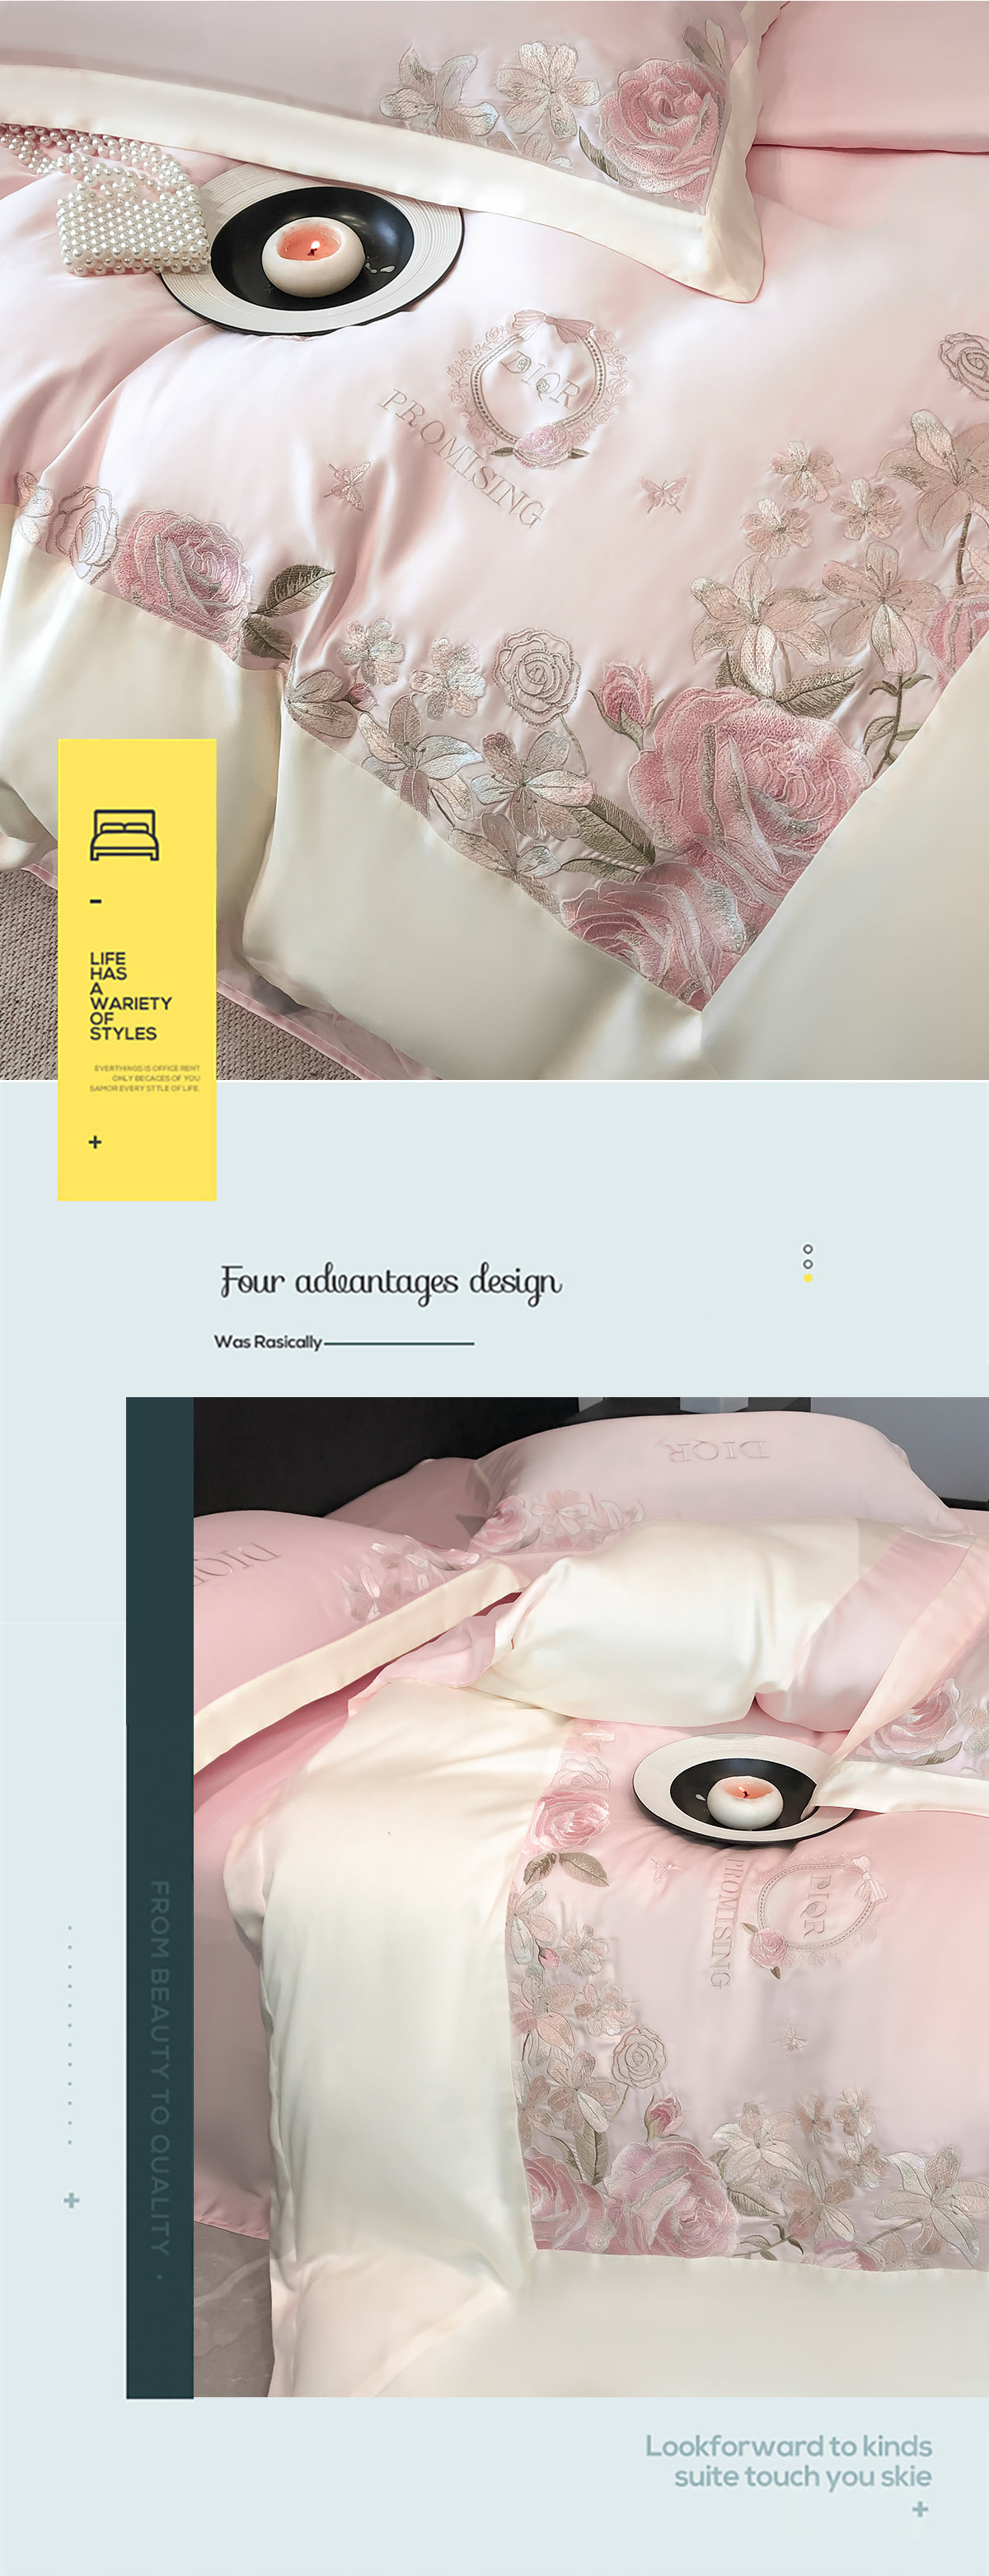 Aesthetic-Embroidery-Home-Textiles-Duvet-Cover-Bedding-Set22